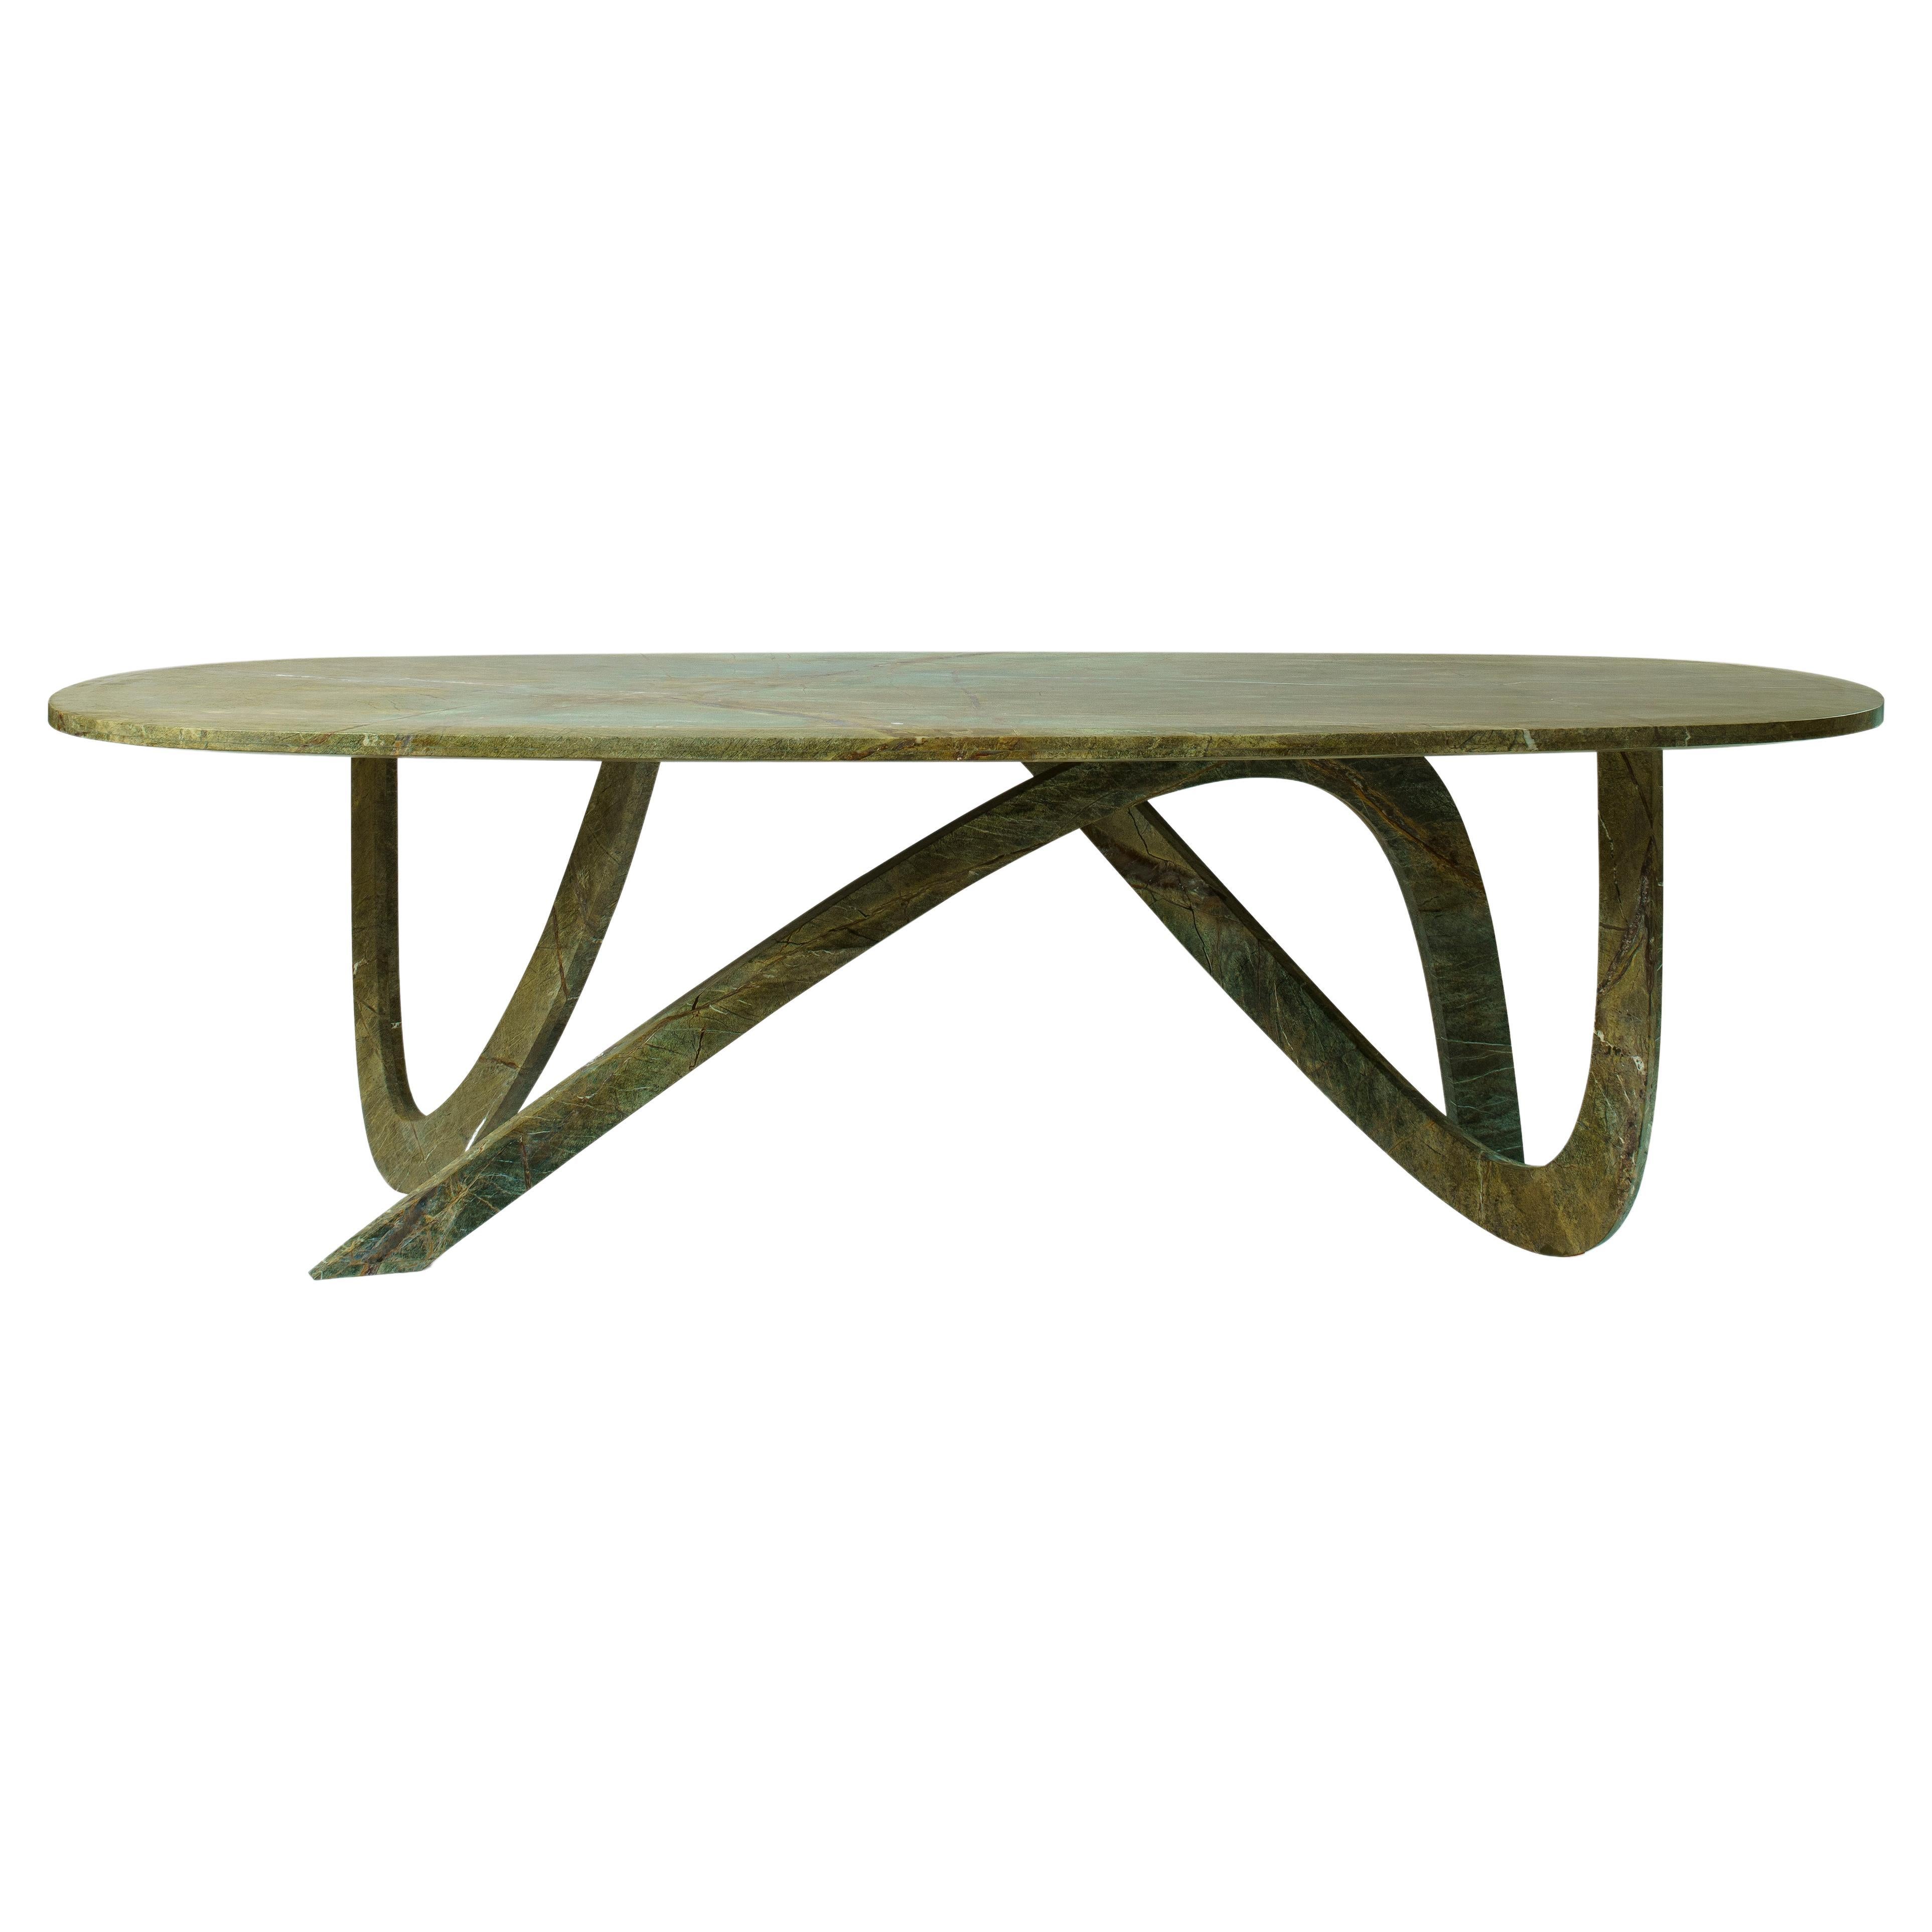 Fleur Dining Table by Dam Atelier for Delvis Unlimited Green Marble 